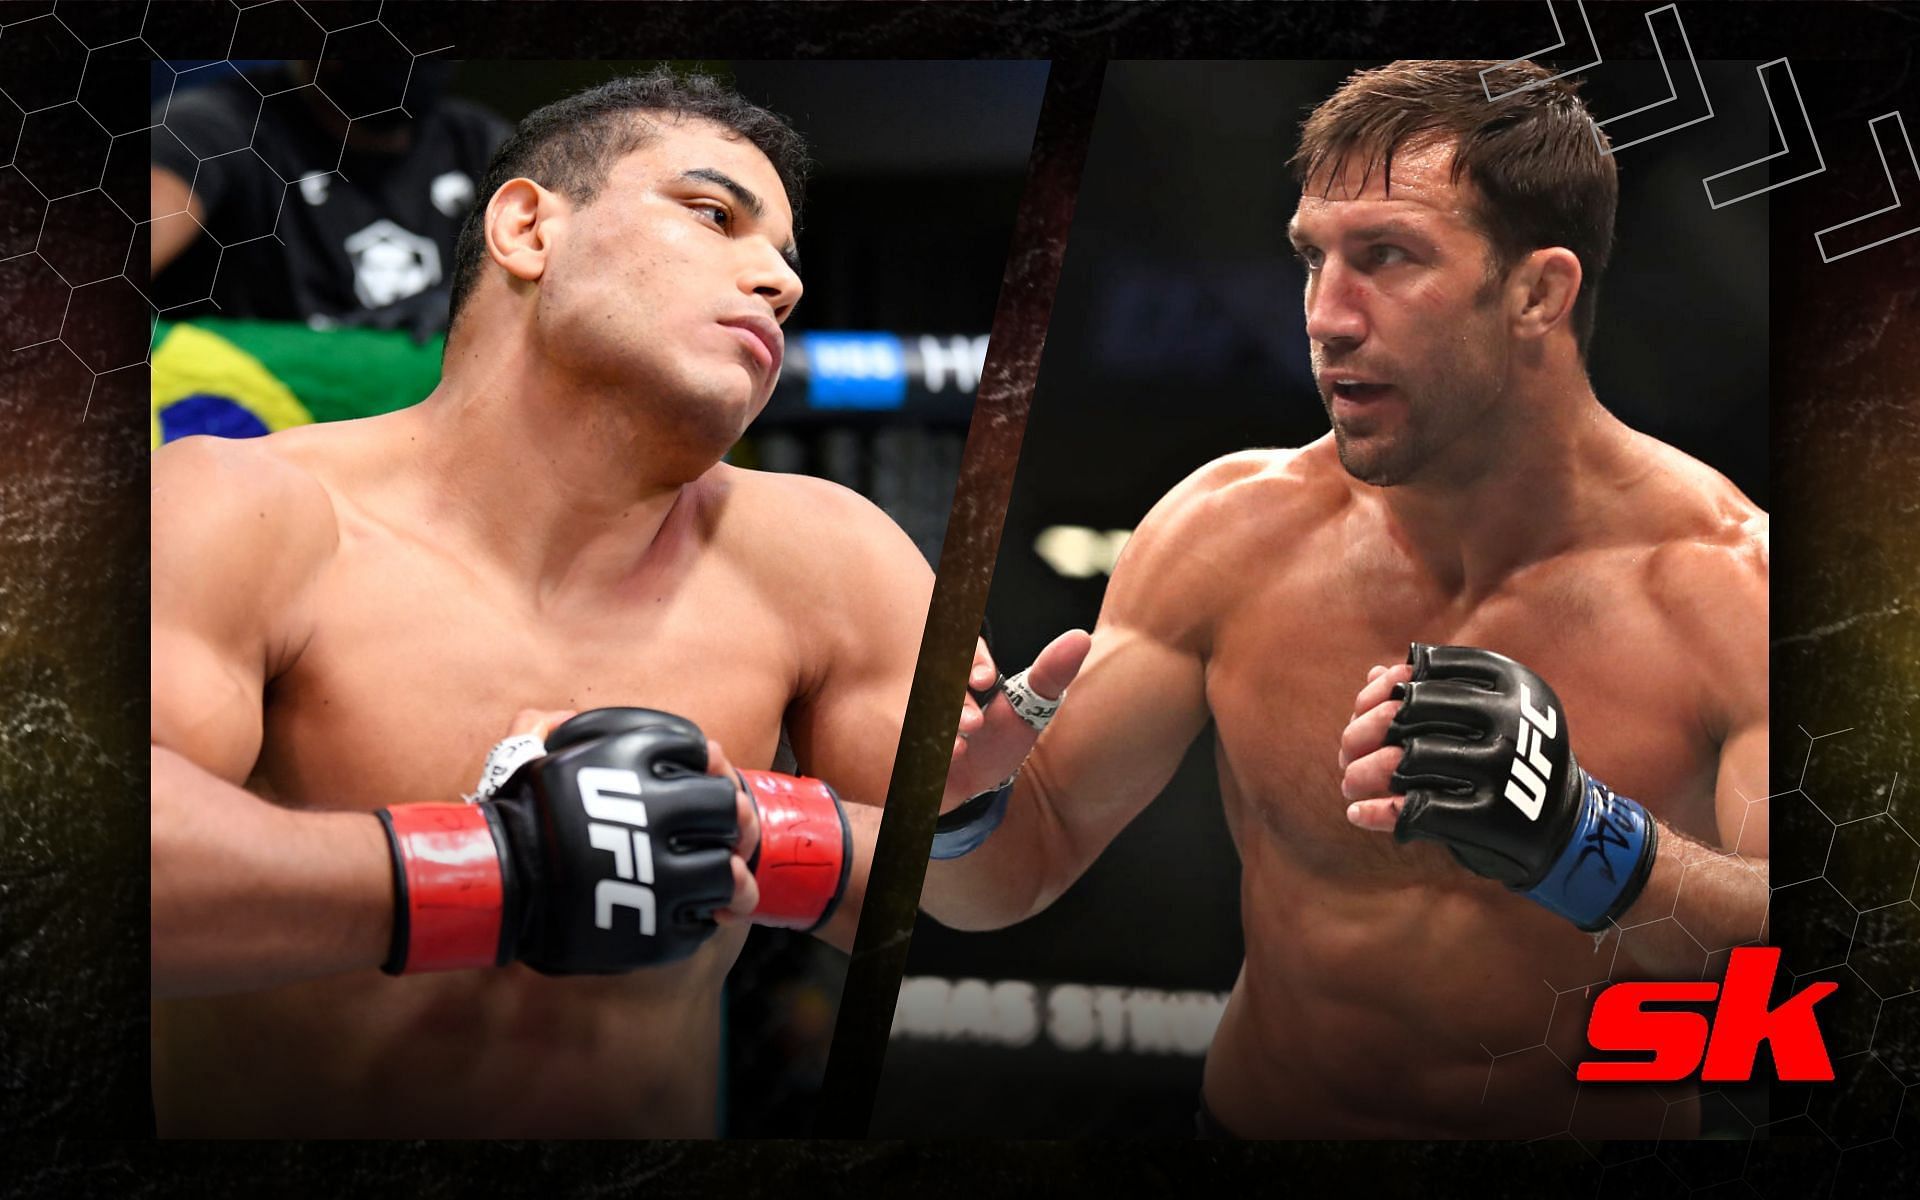 Paulo Costa reveals the advantage he has going into the fight against Luke Rockhold. [image credits: Getty Images].